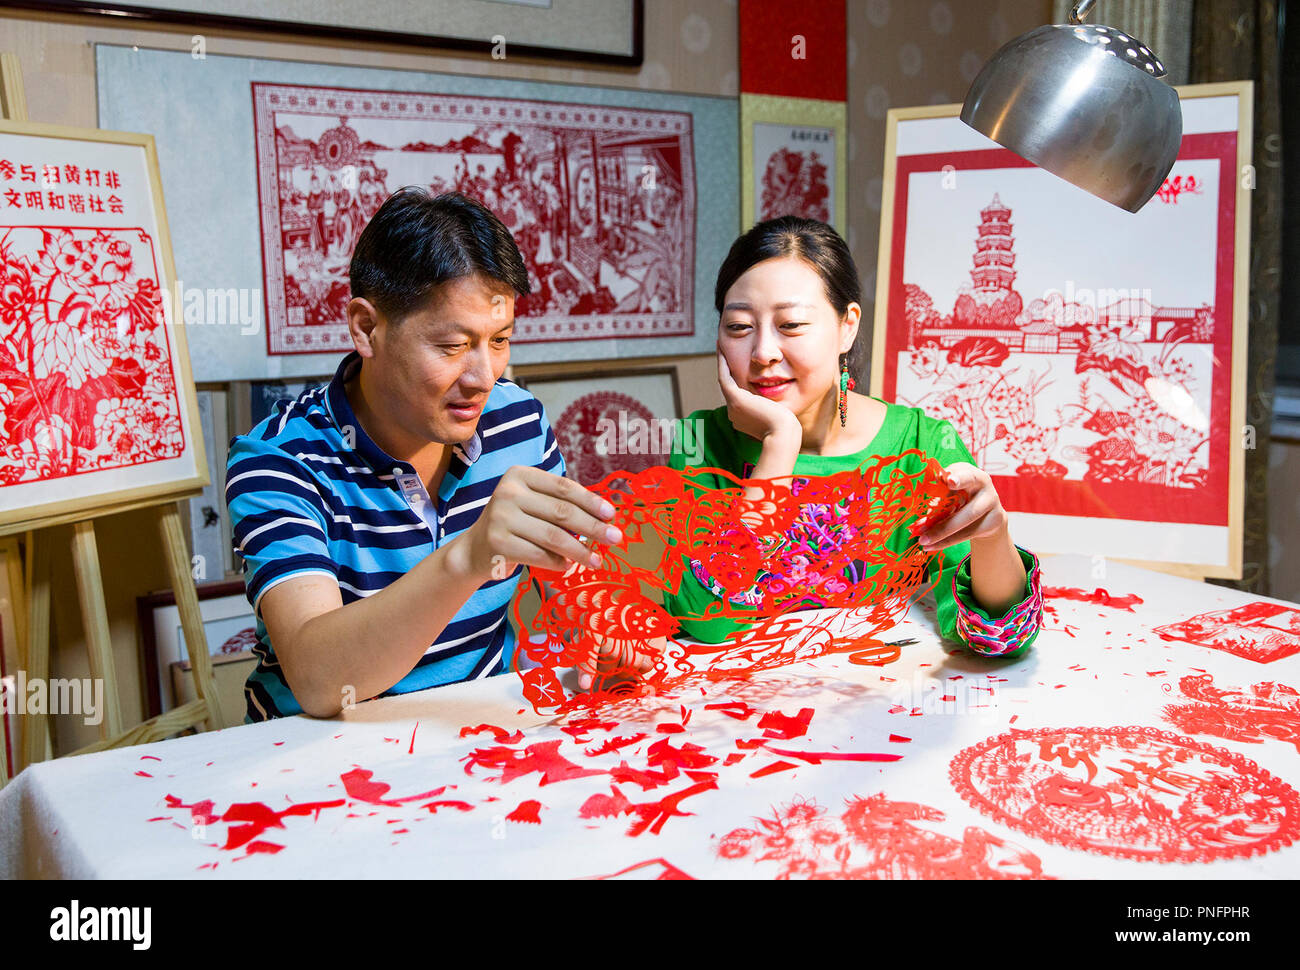 (180921) -- TENGZHOU, Sept. 21, 2018 (Xinhua) -- Papercutting artist Qiu Ting and her husband Qiu Hanping look at a harvest-themed papercutting at home in Tengzhou City, east China's Shandong Province, Sept. 17, 2018. Qiu spent over two months in creating a 2,018-centimeter-long papercutting to greet the first Chinese farmers' harvest festival, which falls on the Autumnal Equinox, or Sept. 23 this year. (Xinhua/Song Haicun) (hxy) Stock Photo